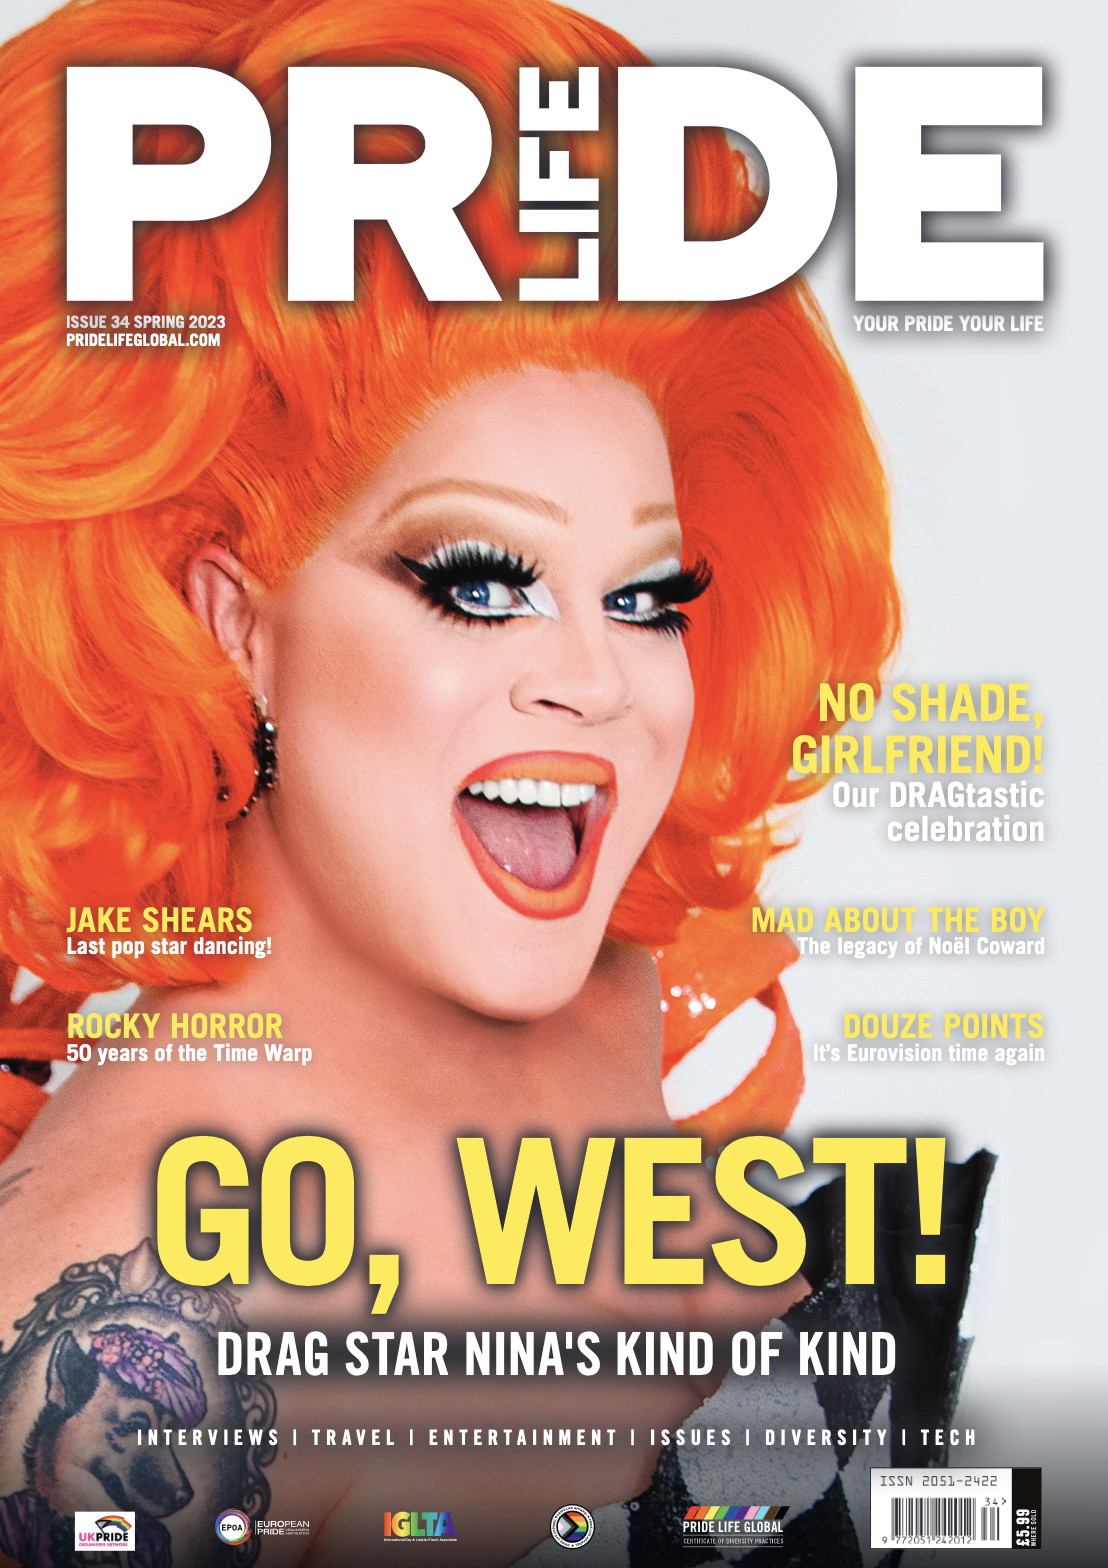 Pride Life Issue 34 - "The Drag Edition".